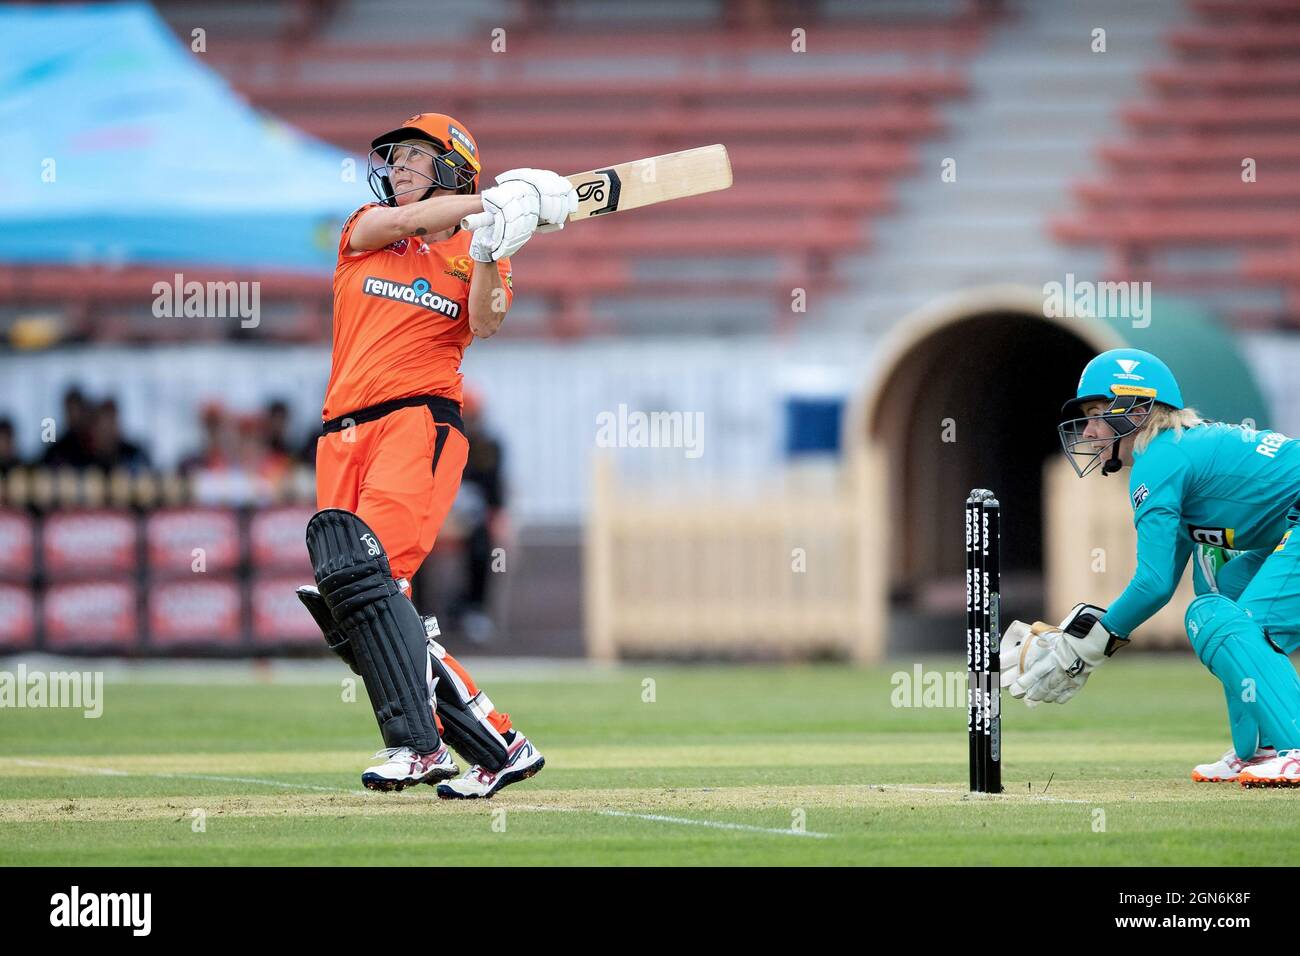 Beth Mooney of the Perth Scorchers plays a shot during the week 1 Womens Big Bash